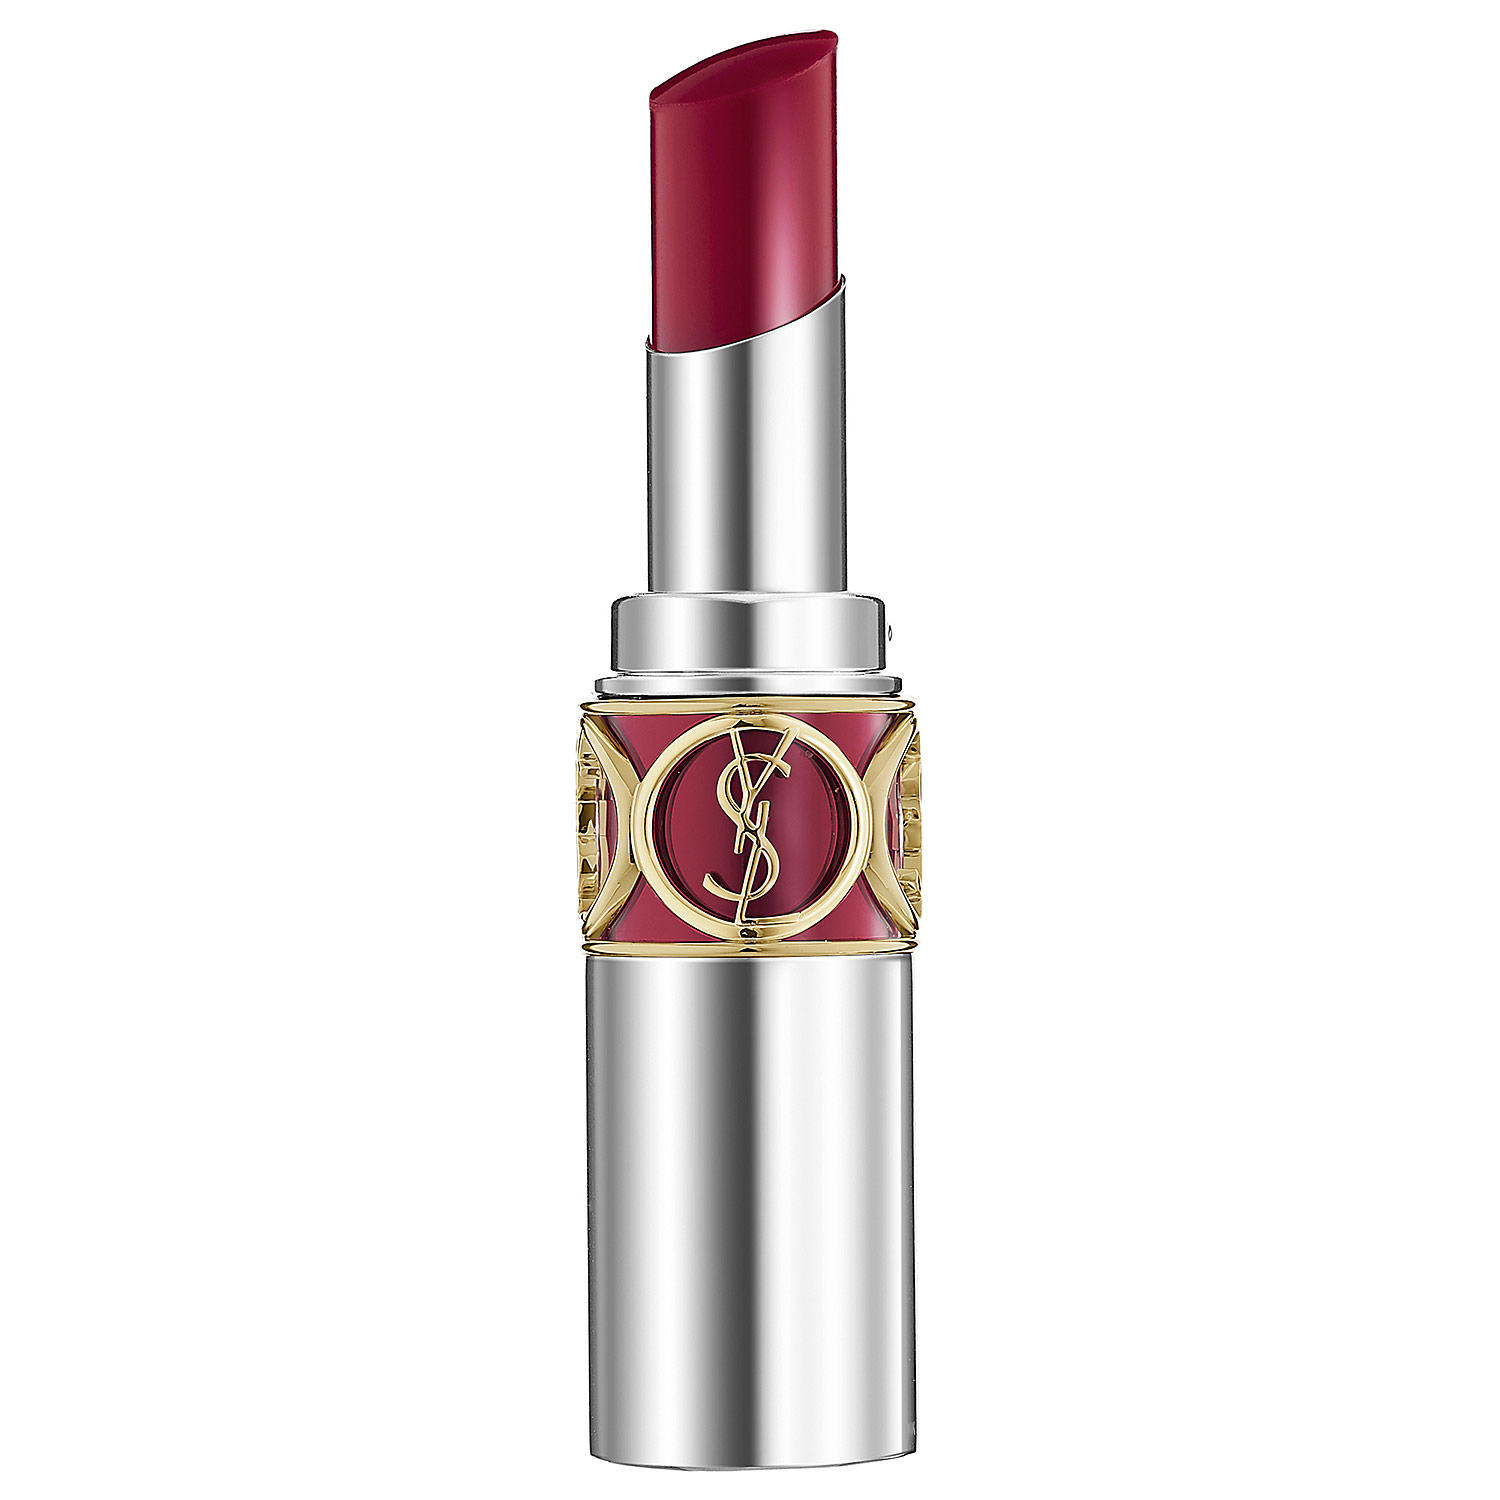 YSL Volupte Sheer Candy Lipstick Mouthwatering Berry 5